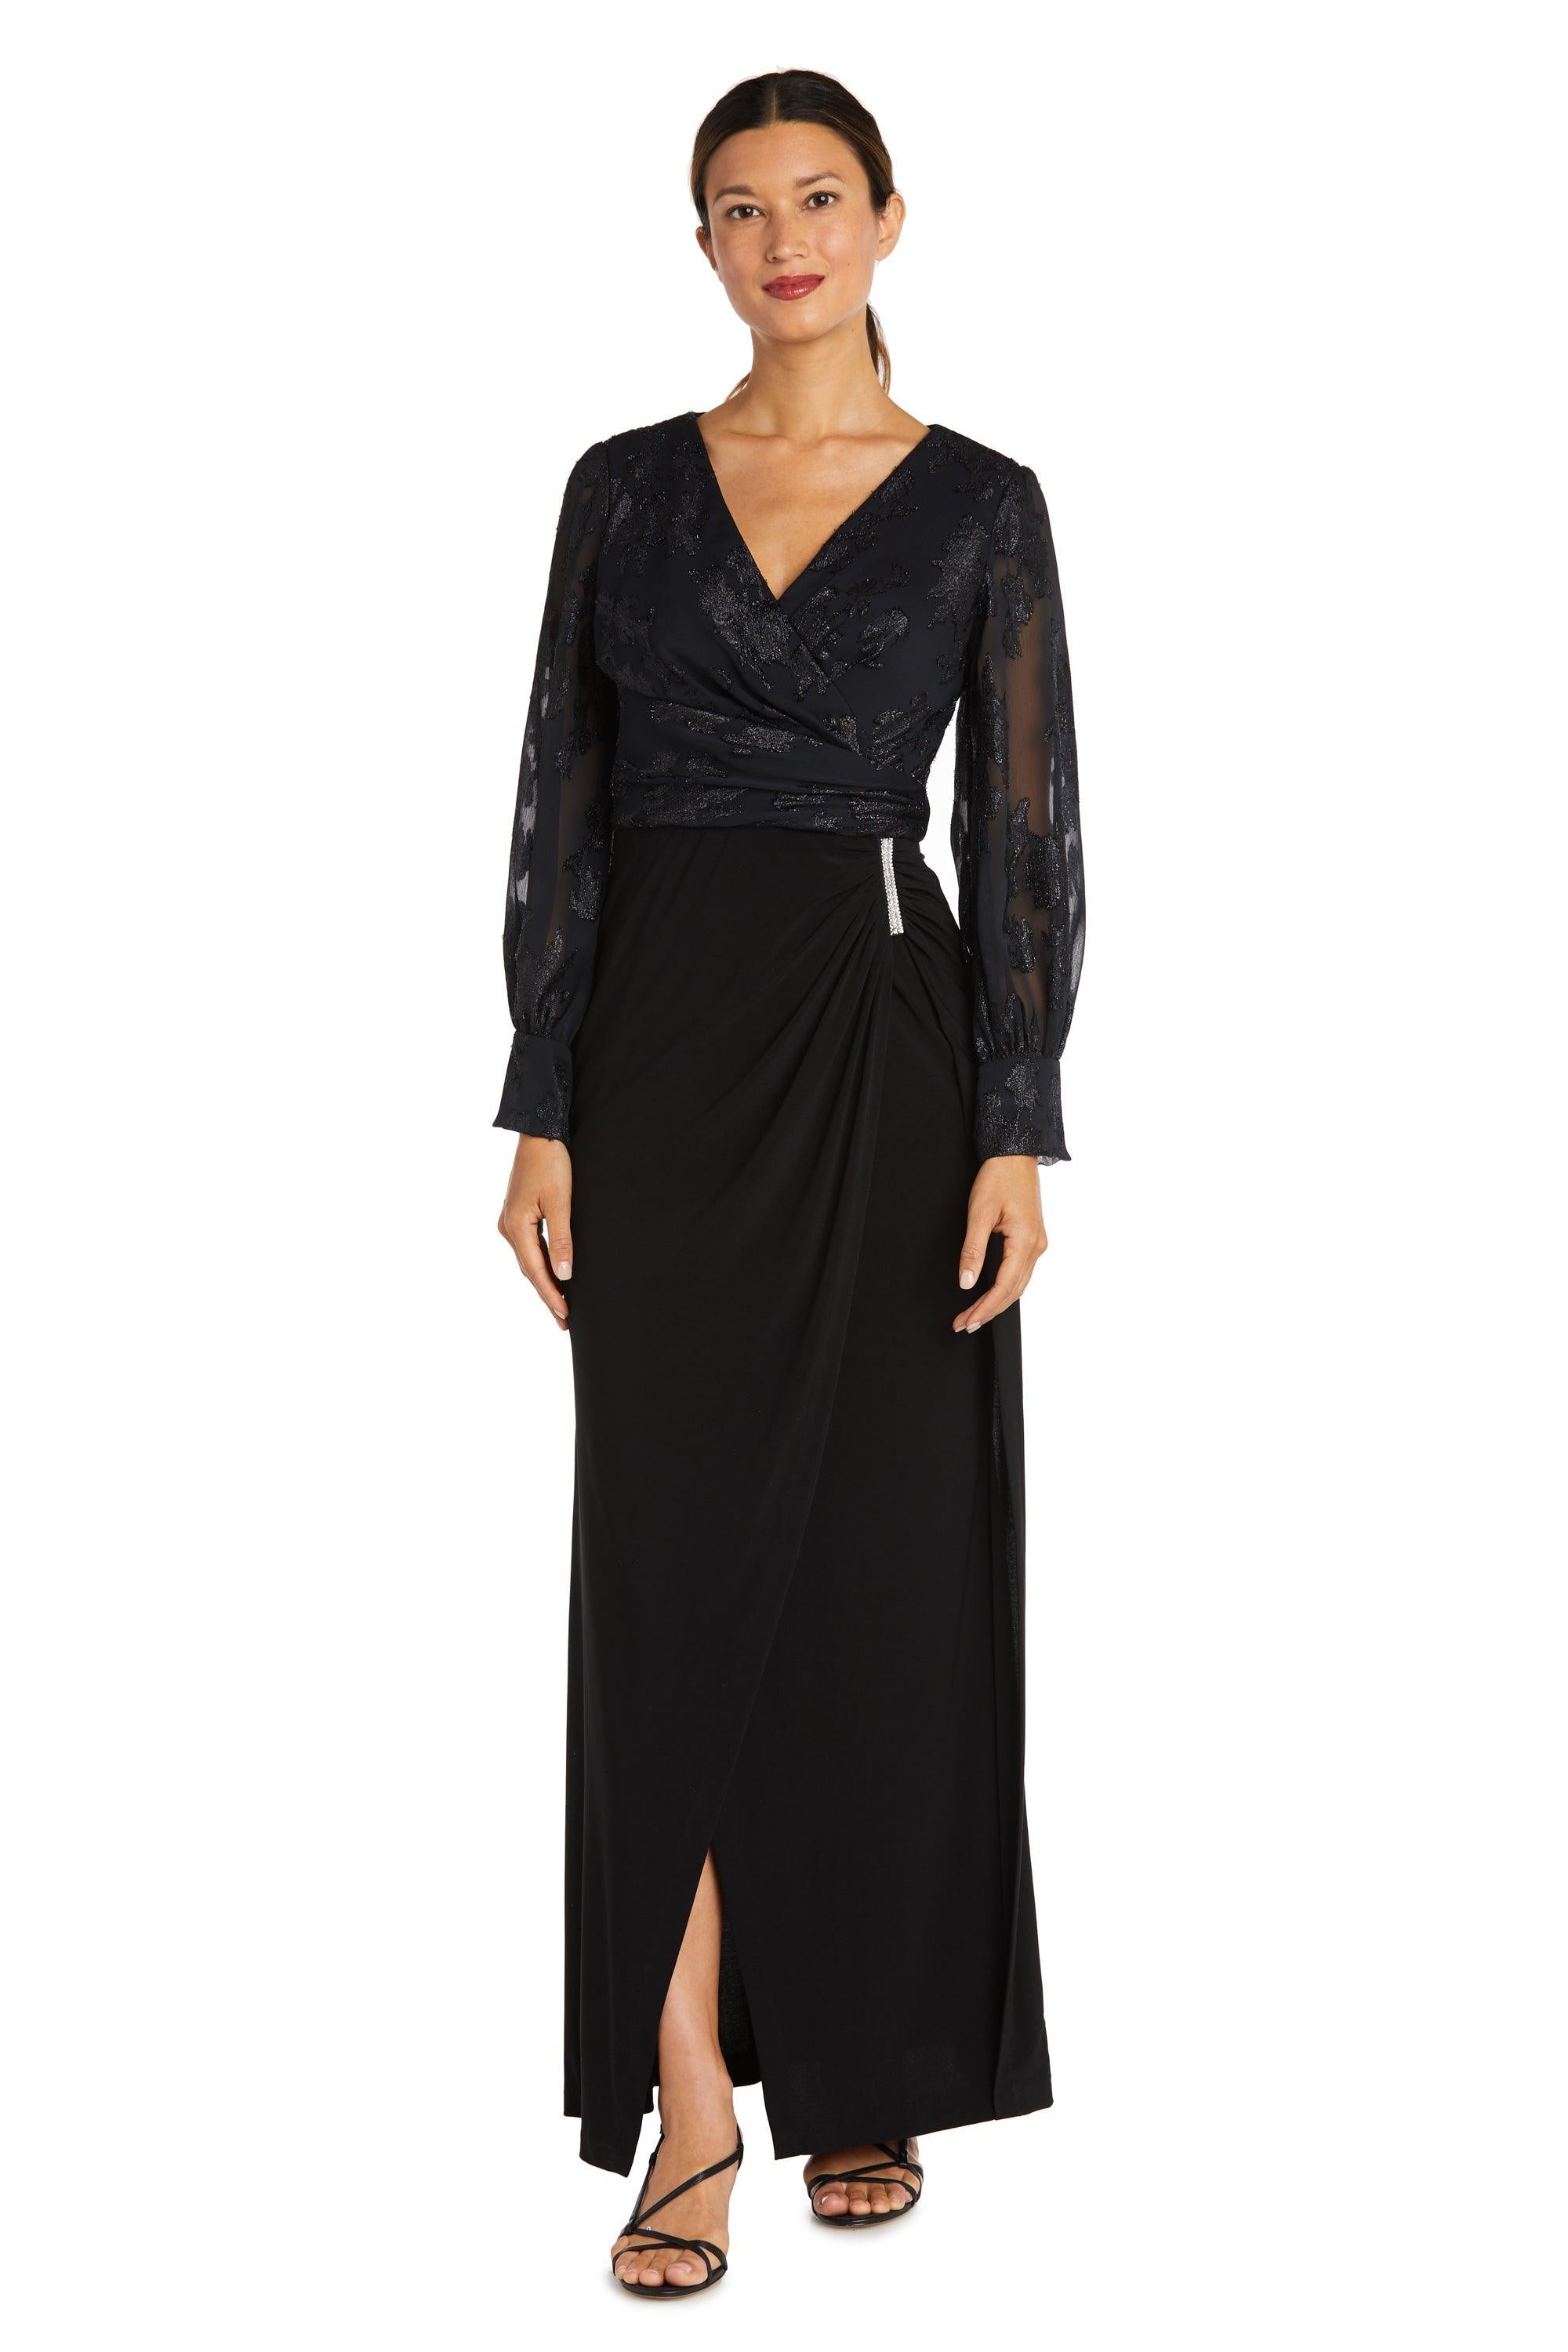 Nightway Mother of the Bride Long Dress 22062 - The Dress Outlet